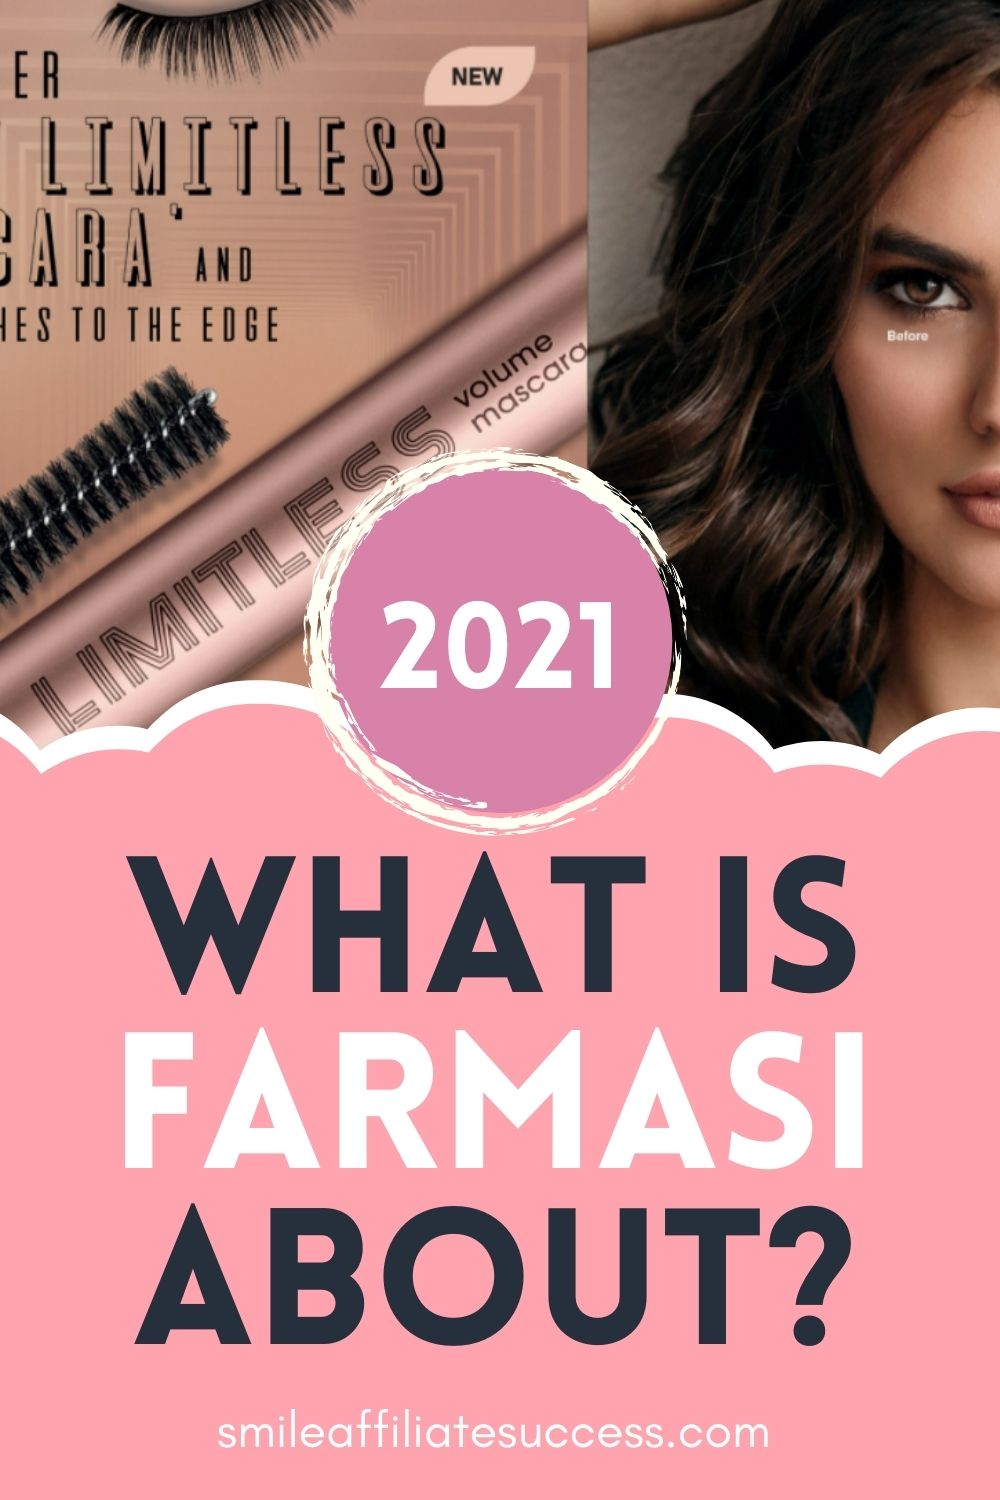 What Is Farmasi About?